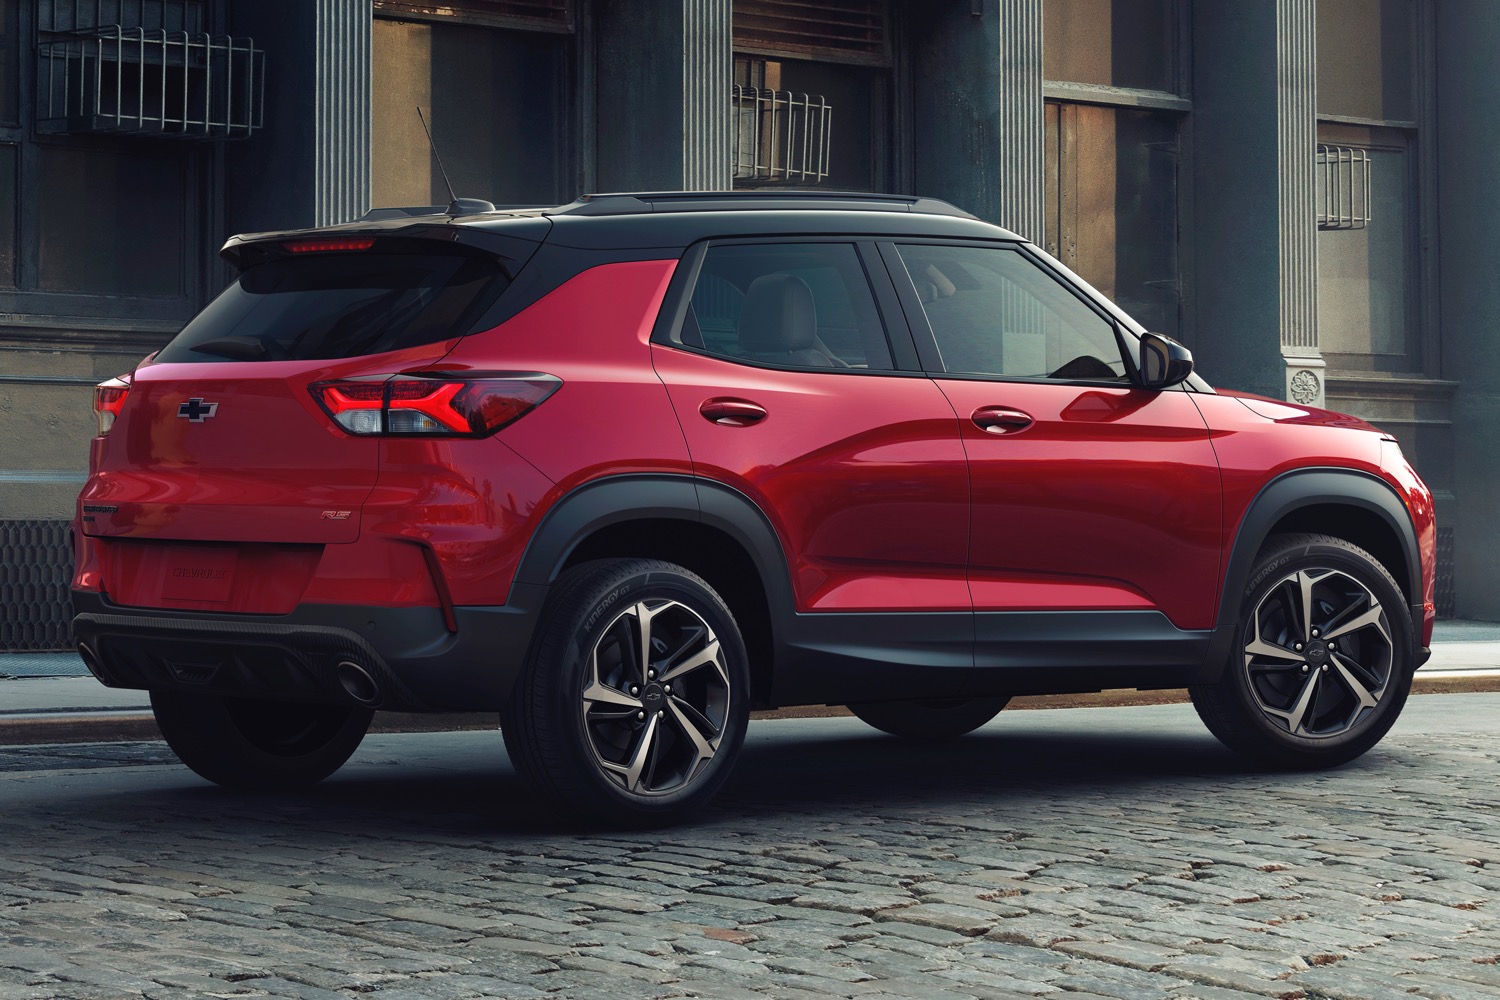 2022 Chevy Trailblazer Gets New Crimson Color First Look